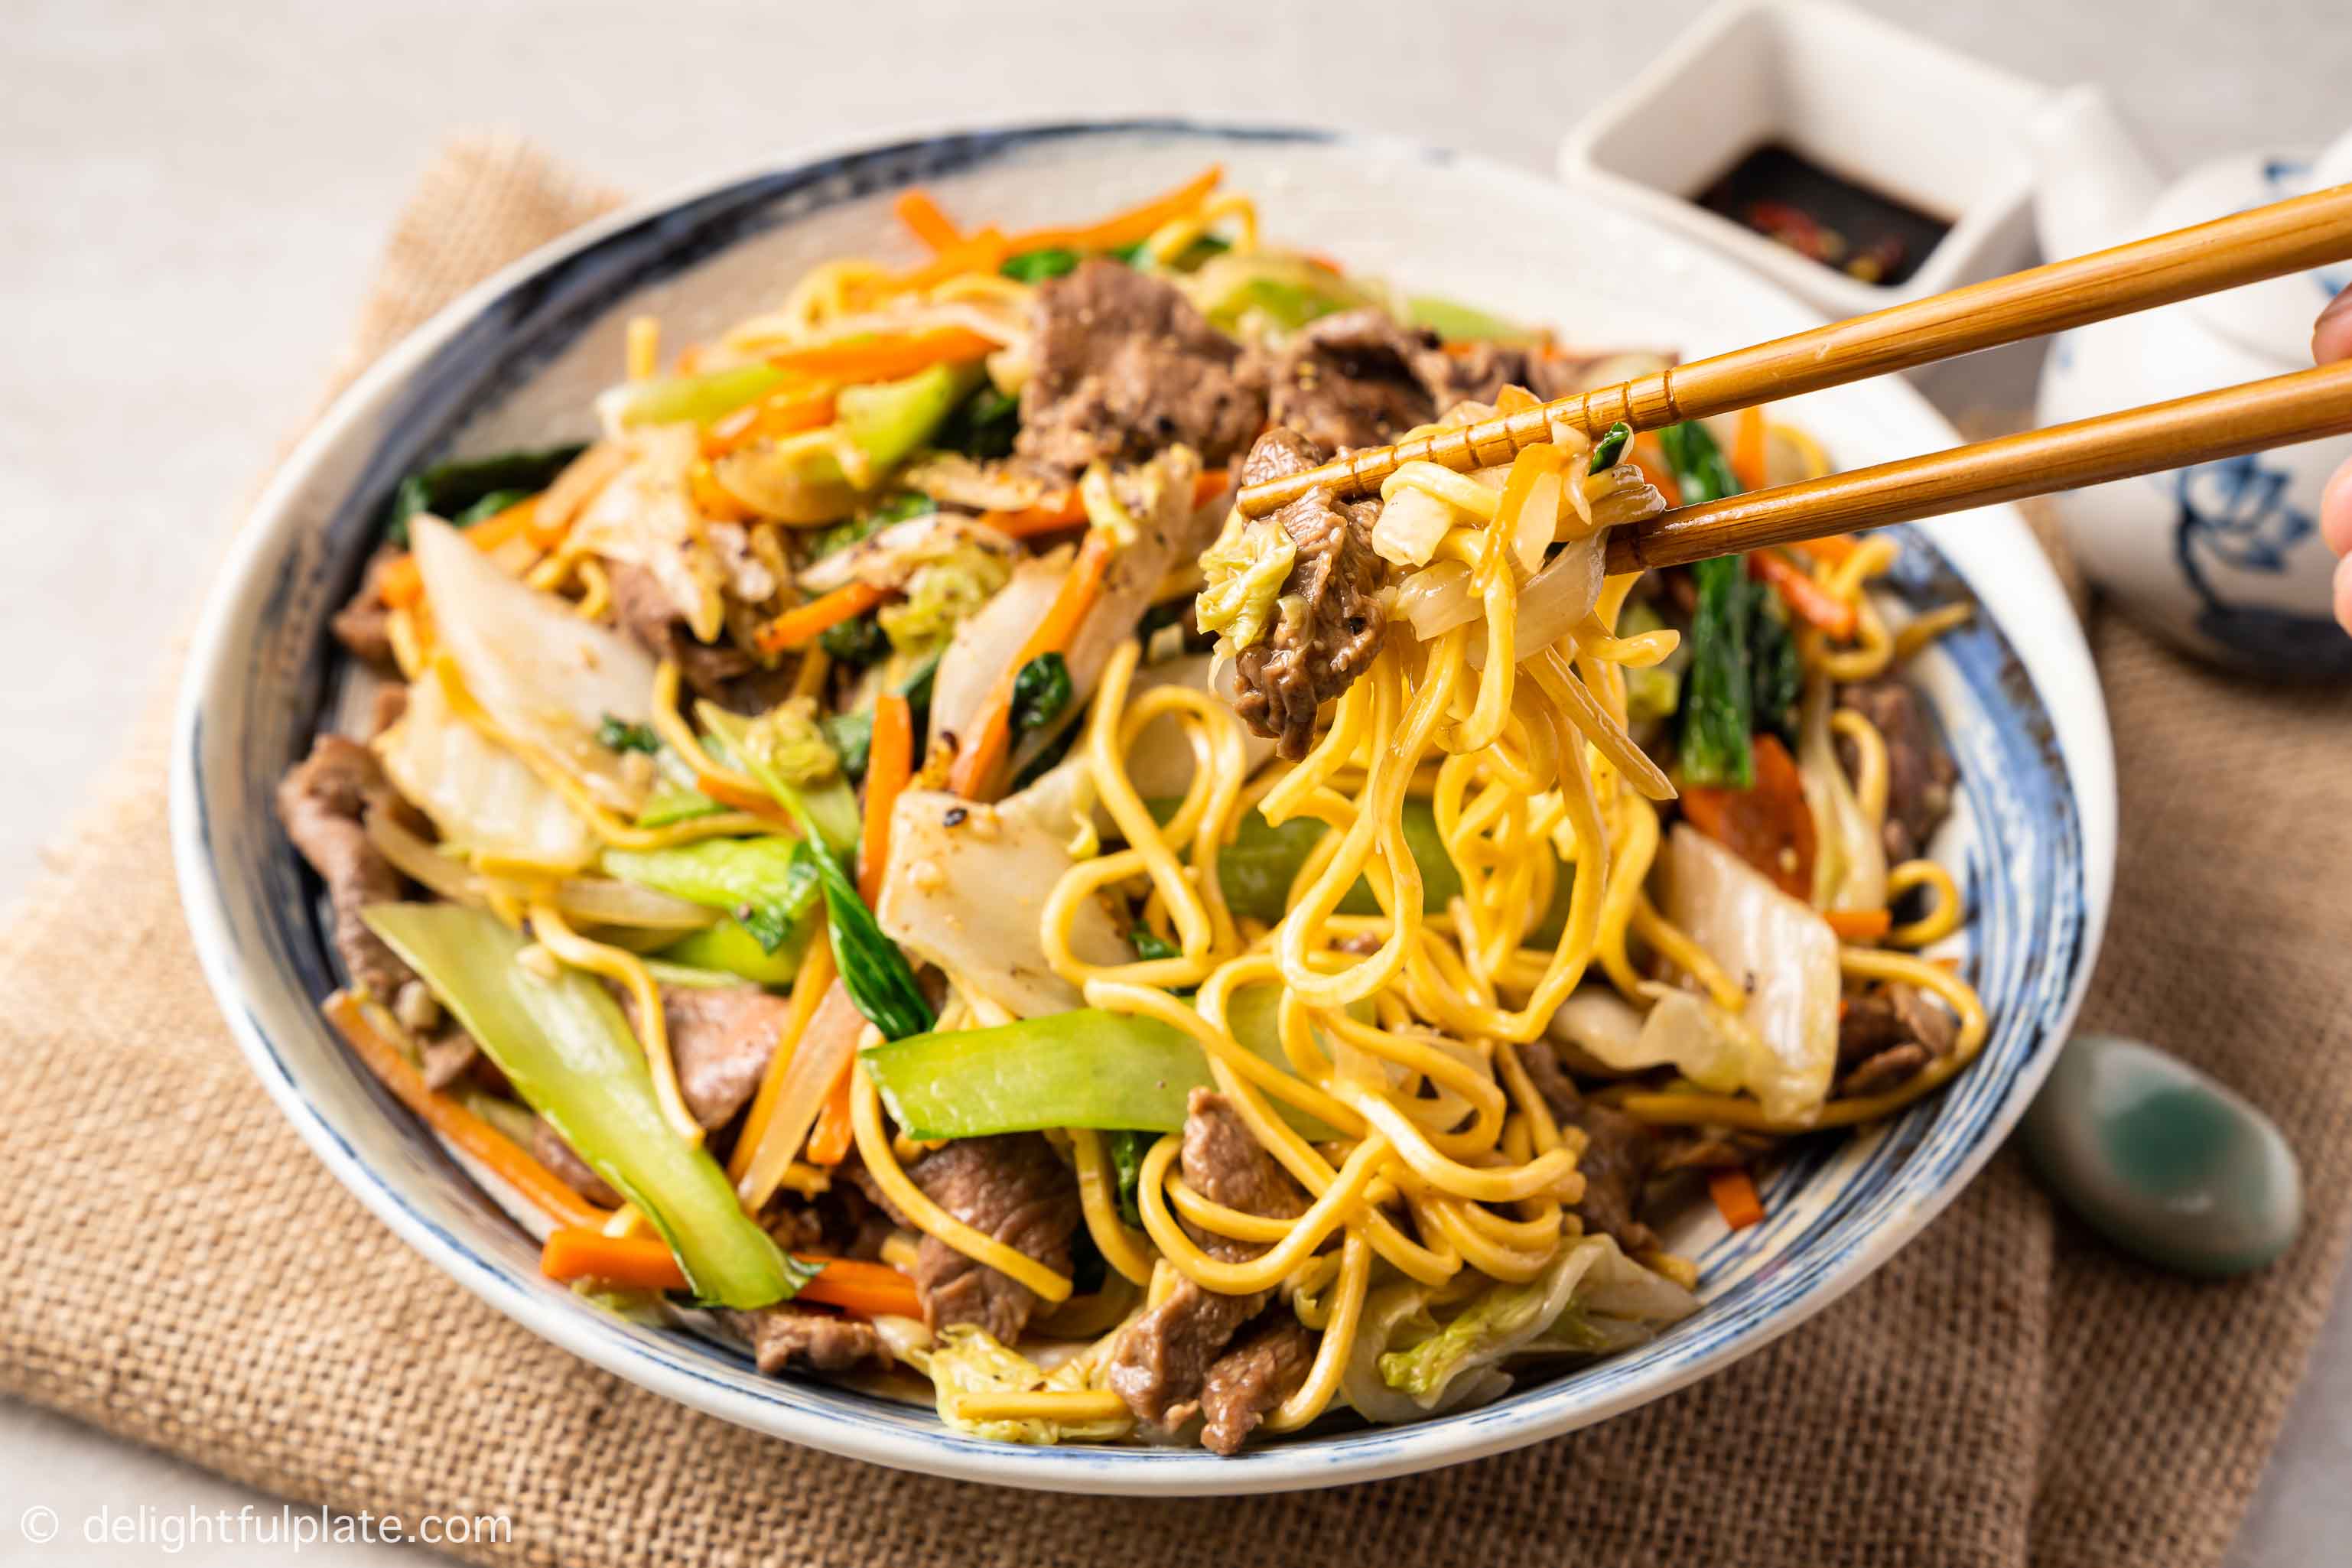 a bowl of beef noodle stir fry (beef chow mein)